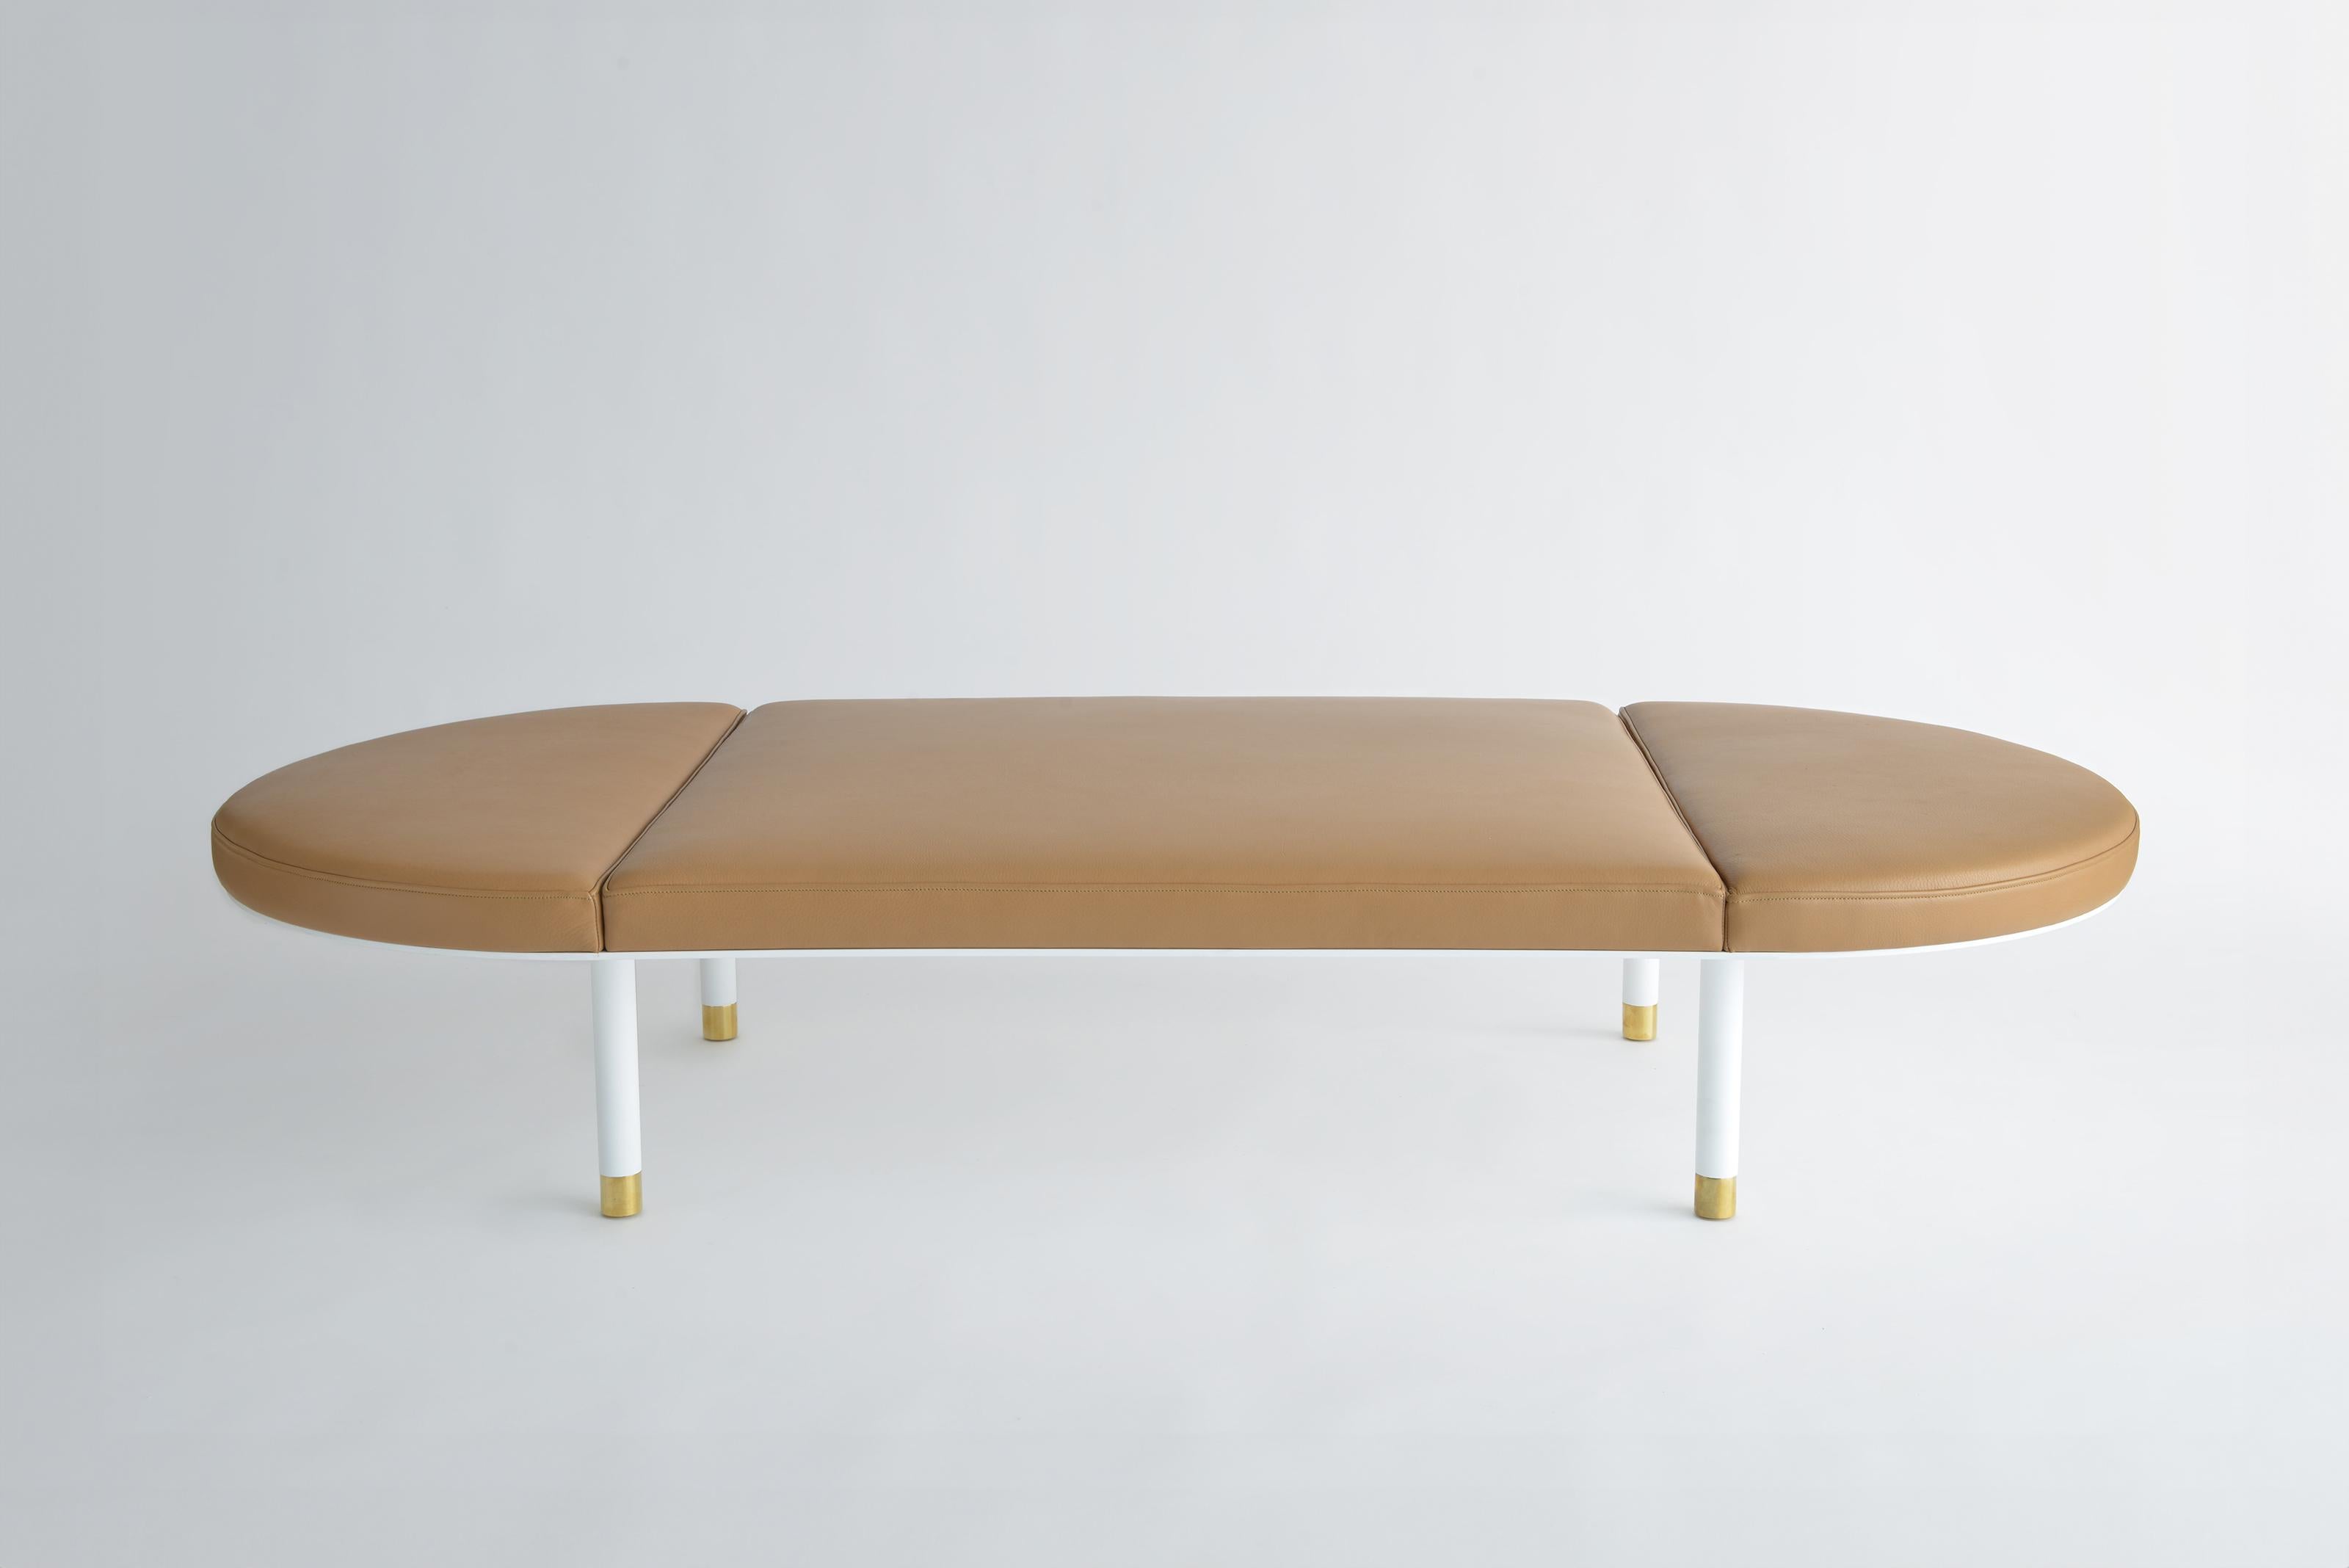 Pill Leather Daybed by Phase Design
Dimensions: D 182.9 x W 86.4 x H 34.3 cm. 
Materials: Powder-coated steel, brass and leather.

Powder-coated steel base with solid brass tips. Powder coat finishes are available in flat black, flat white, or flat